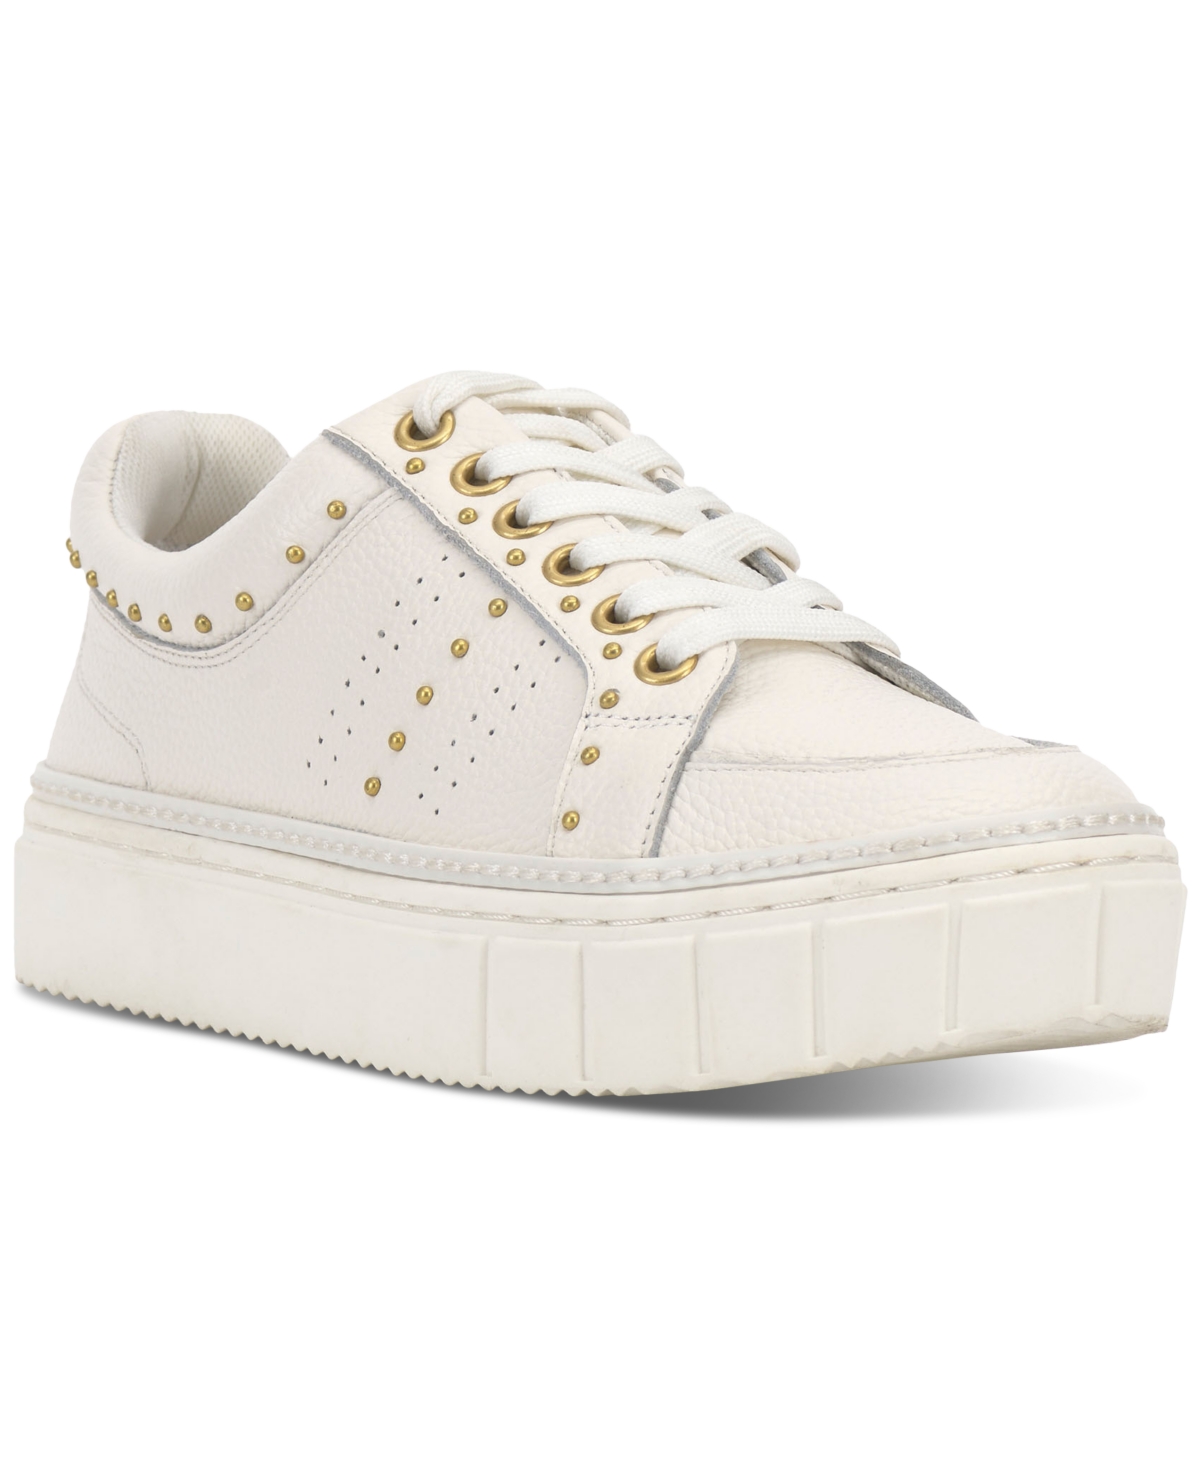 Rosanie Studded Lace-Up Sneakers - White